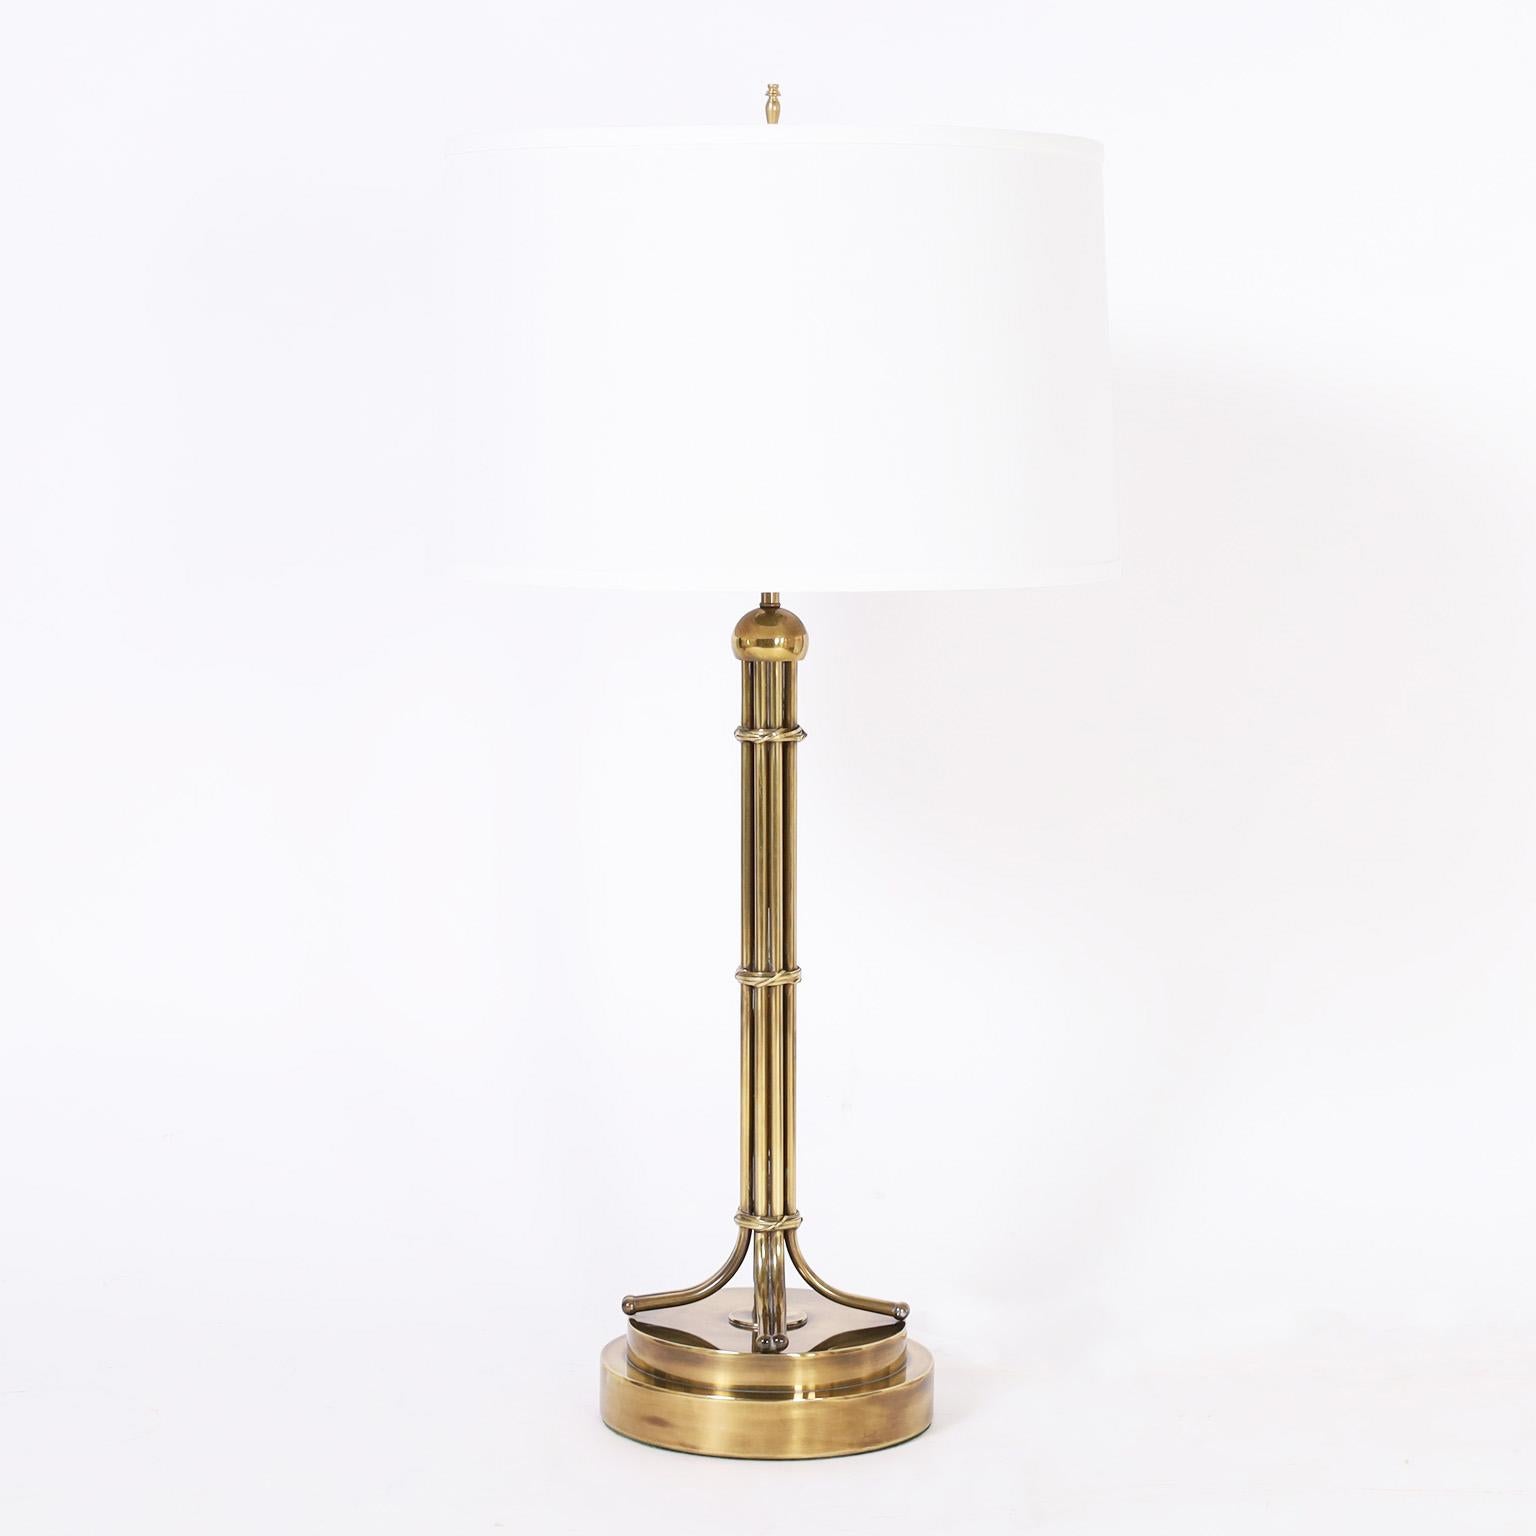 Chic pair of mid-century table lamps crafted in brass in a modern regency form with a hip burnished and lacquered finish.